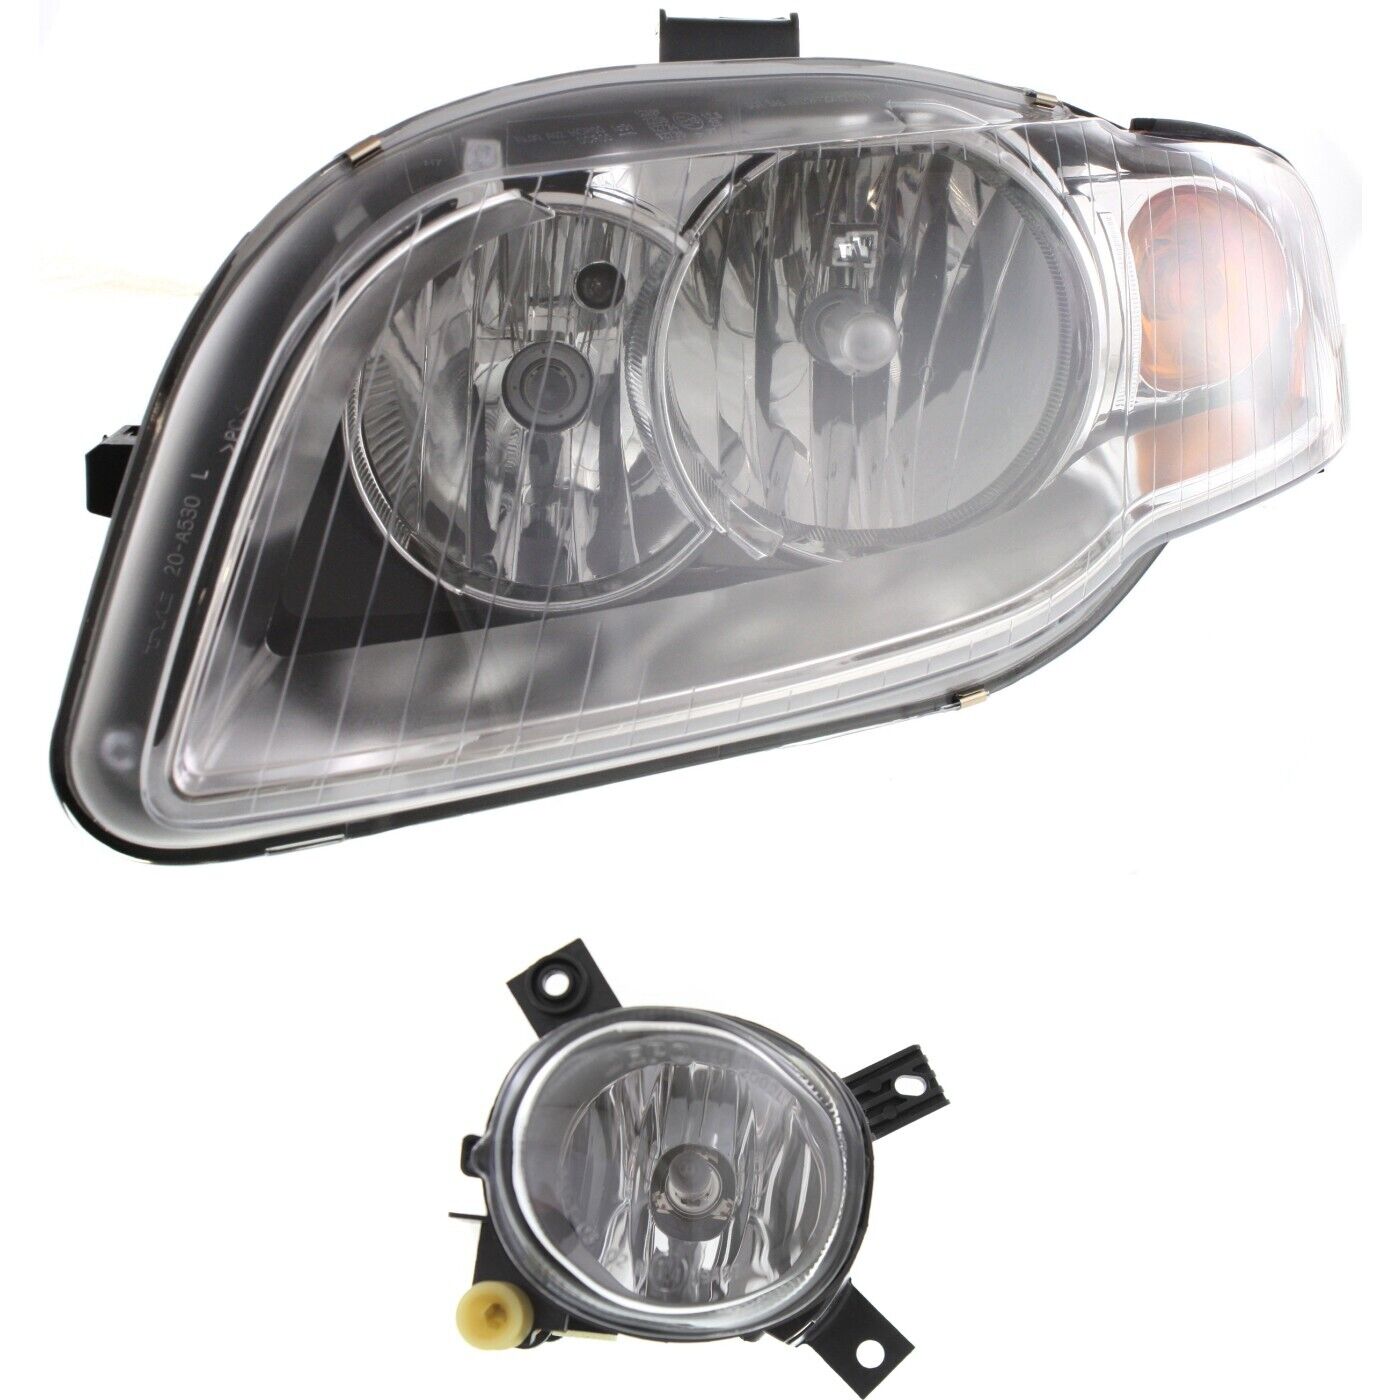 Headlight Kit For 2005-2009 Audi A4 Driver Side